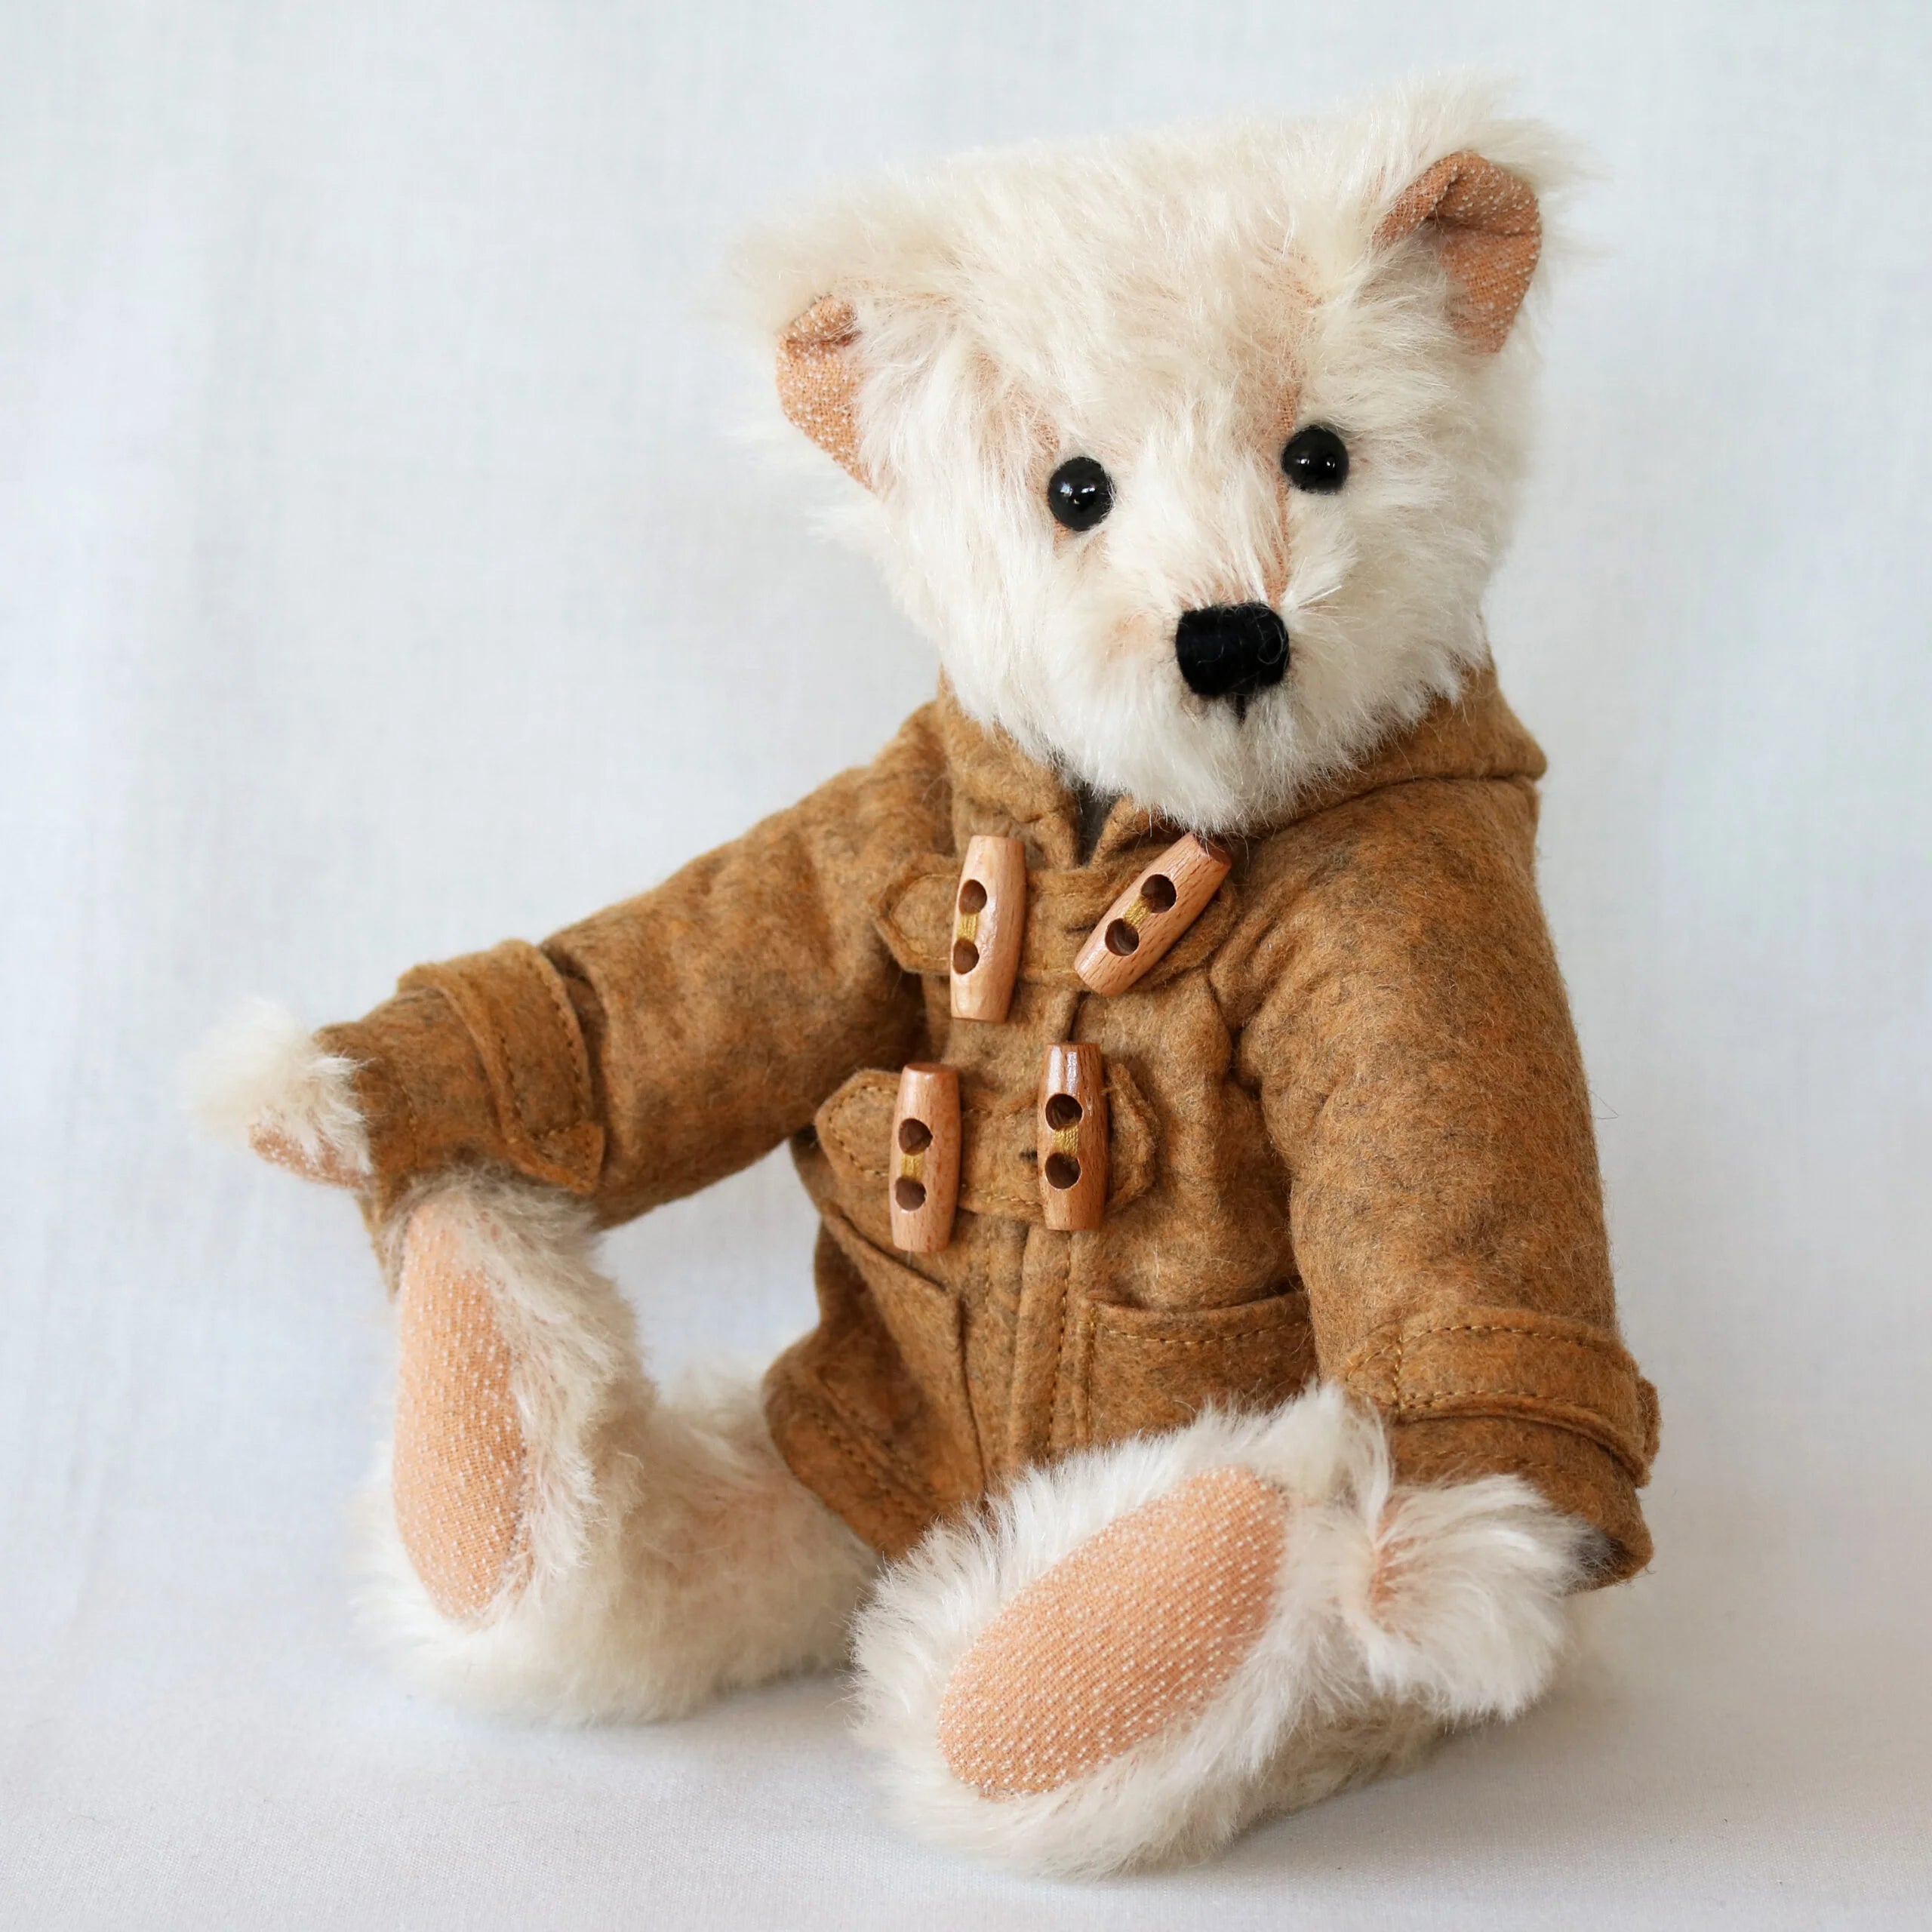 Wooster the Bear by Canterbury Bears